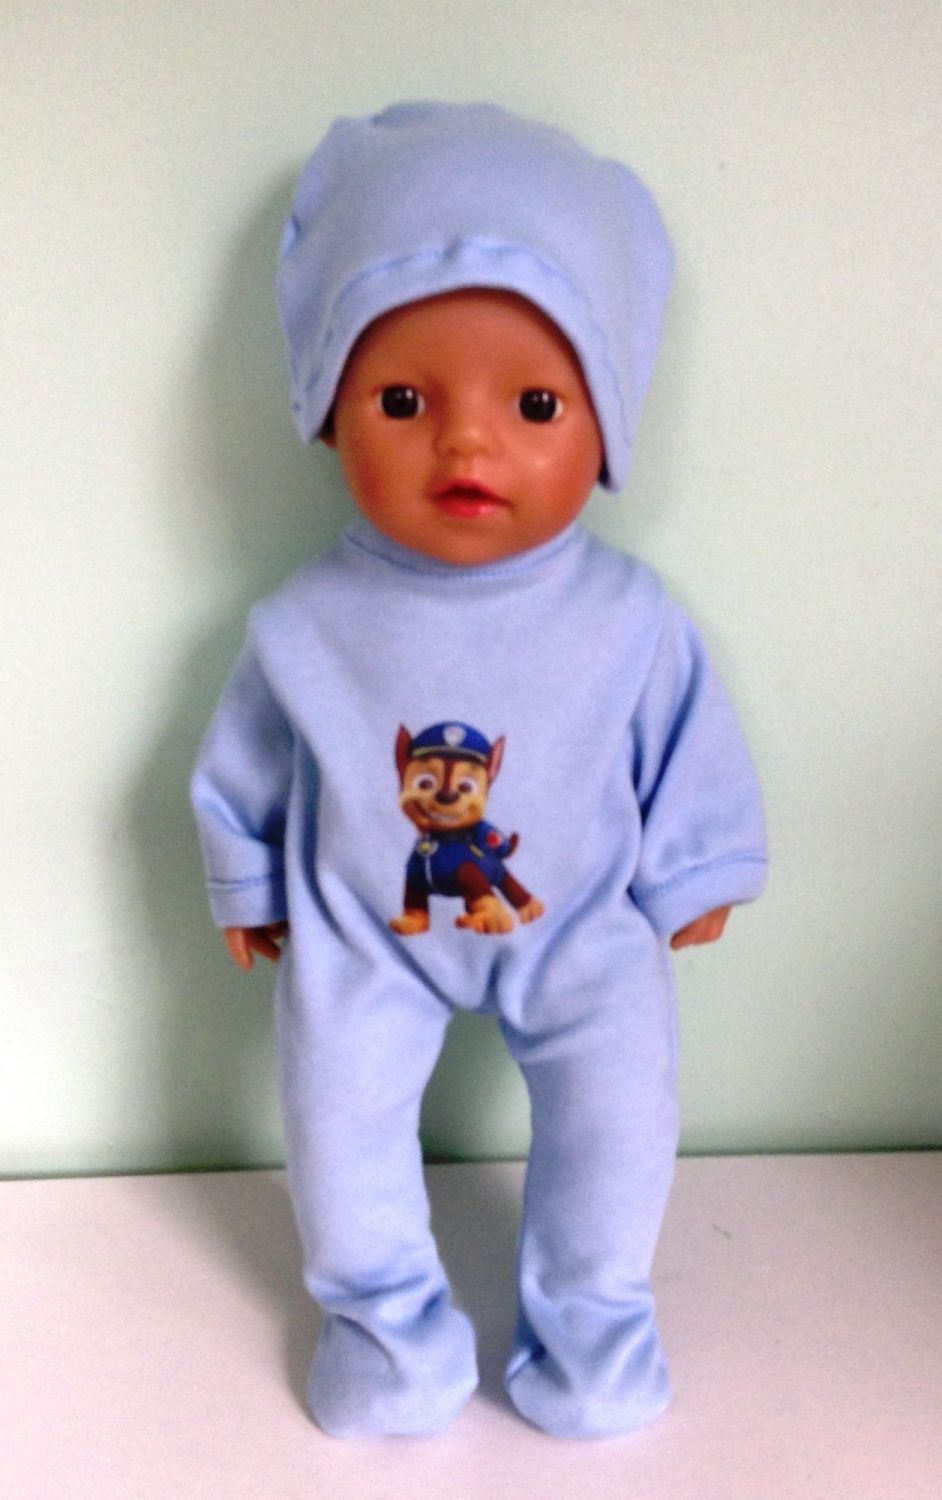 Doll's sleepsuit/playsuit made to fit a 12 inch high baby boy doll